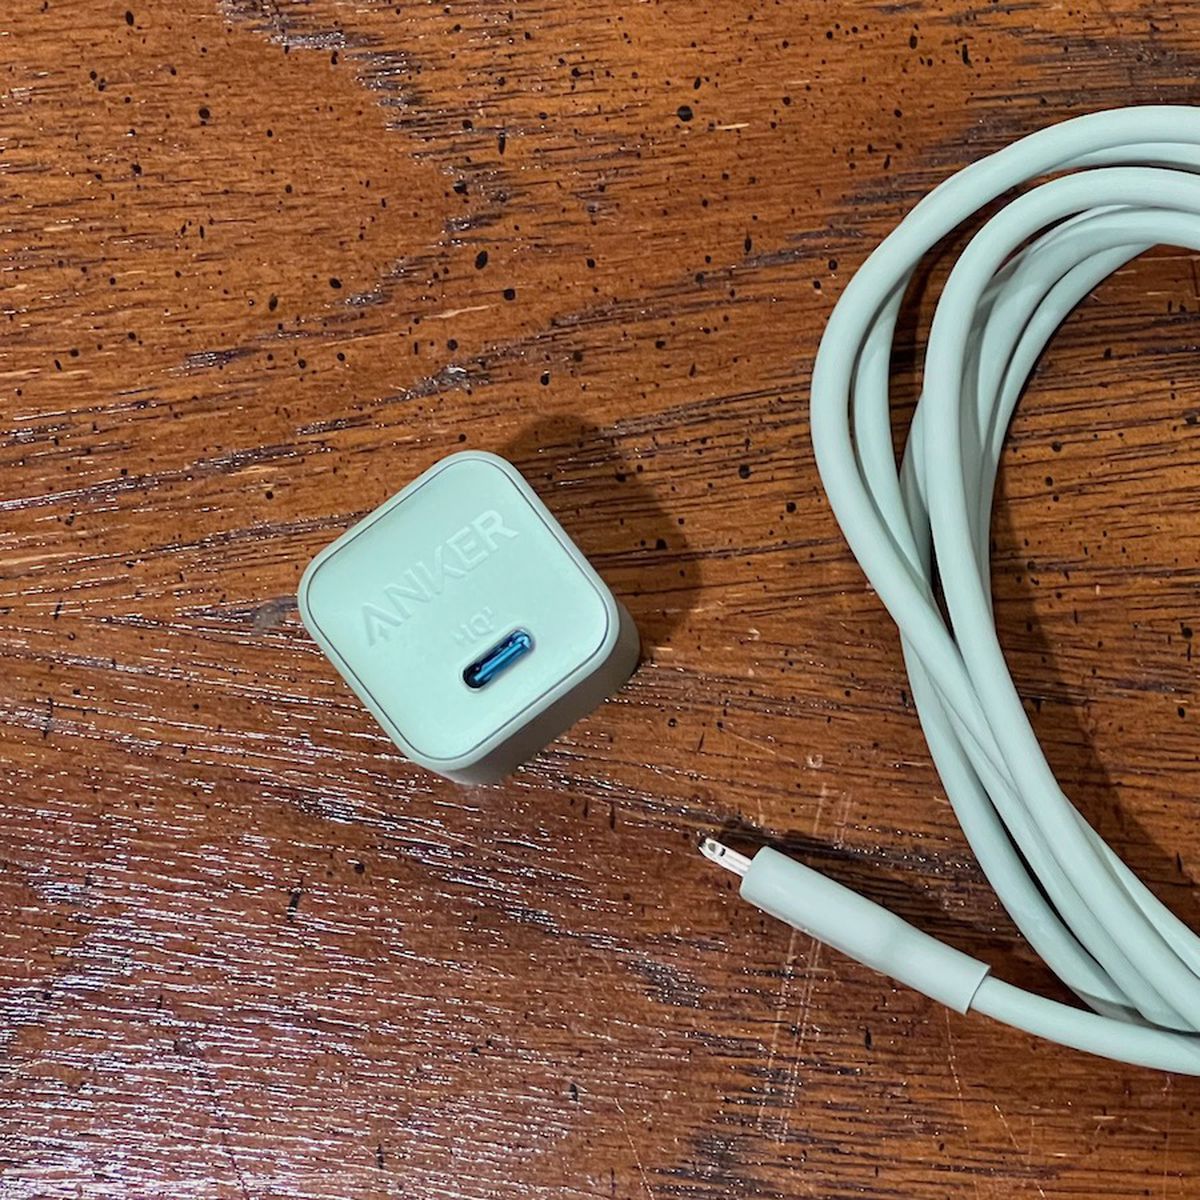 Review: Anker PowerPort III Nano is the charger Apple should've shipped  with the iPhone 11 - iPhone Discussions on AppleInsider Forums